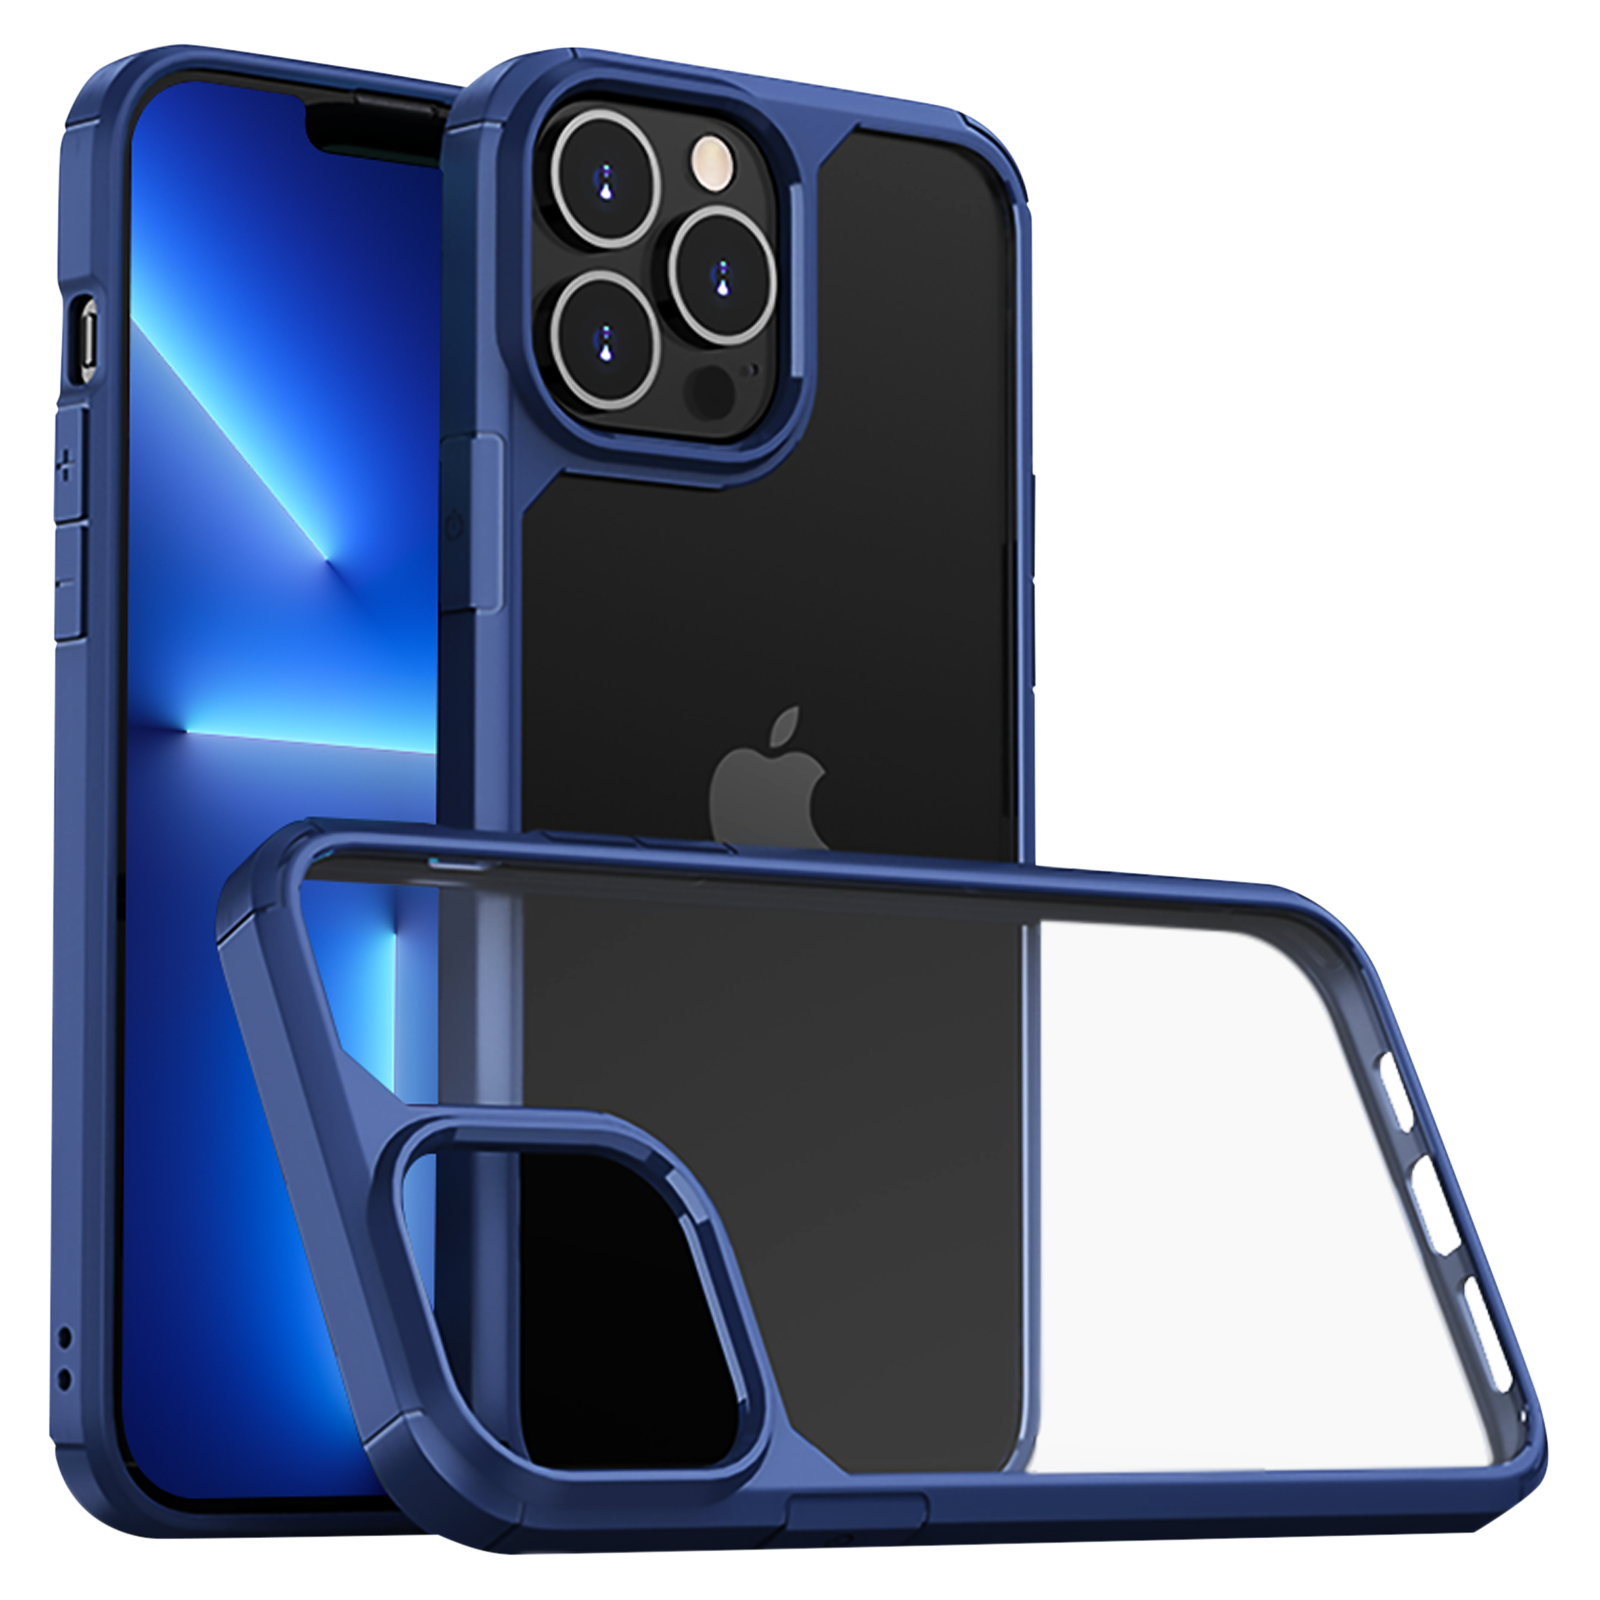 GRIPP Defender Hard Polycarbonate & TPU Back Cover for Apple iPhone 13 Pro (Drop Protection, Blue)